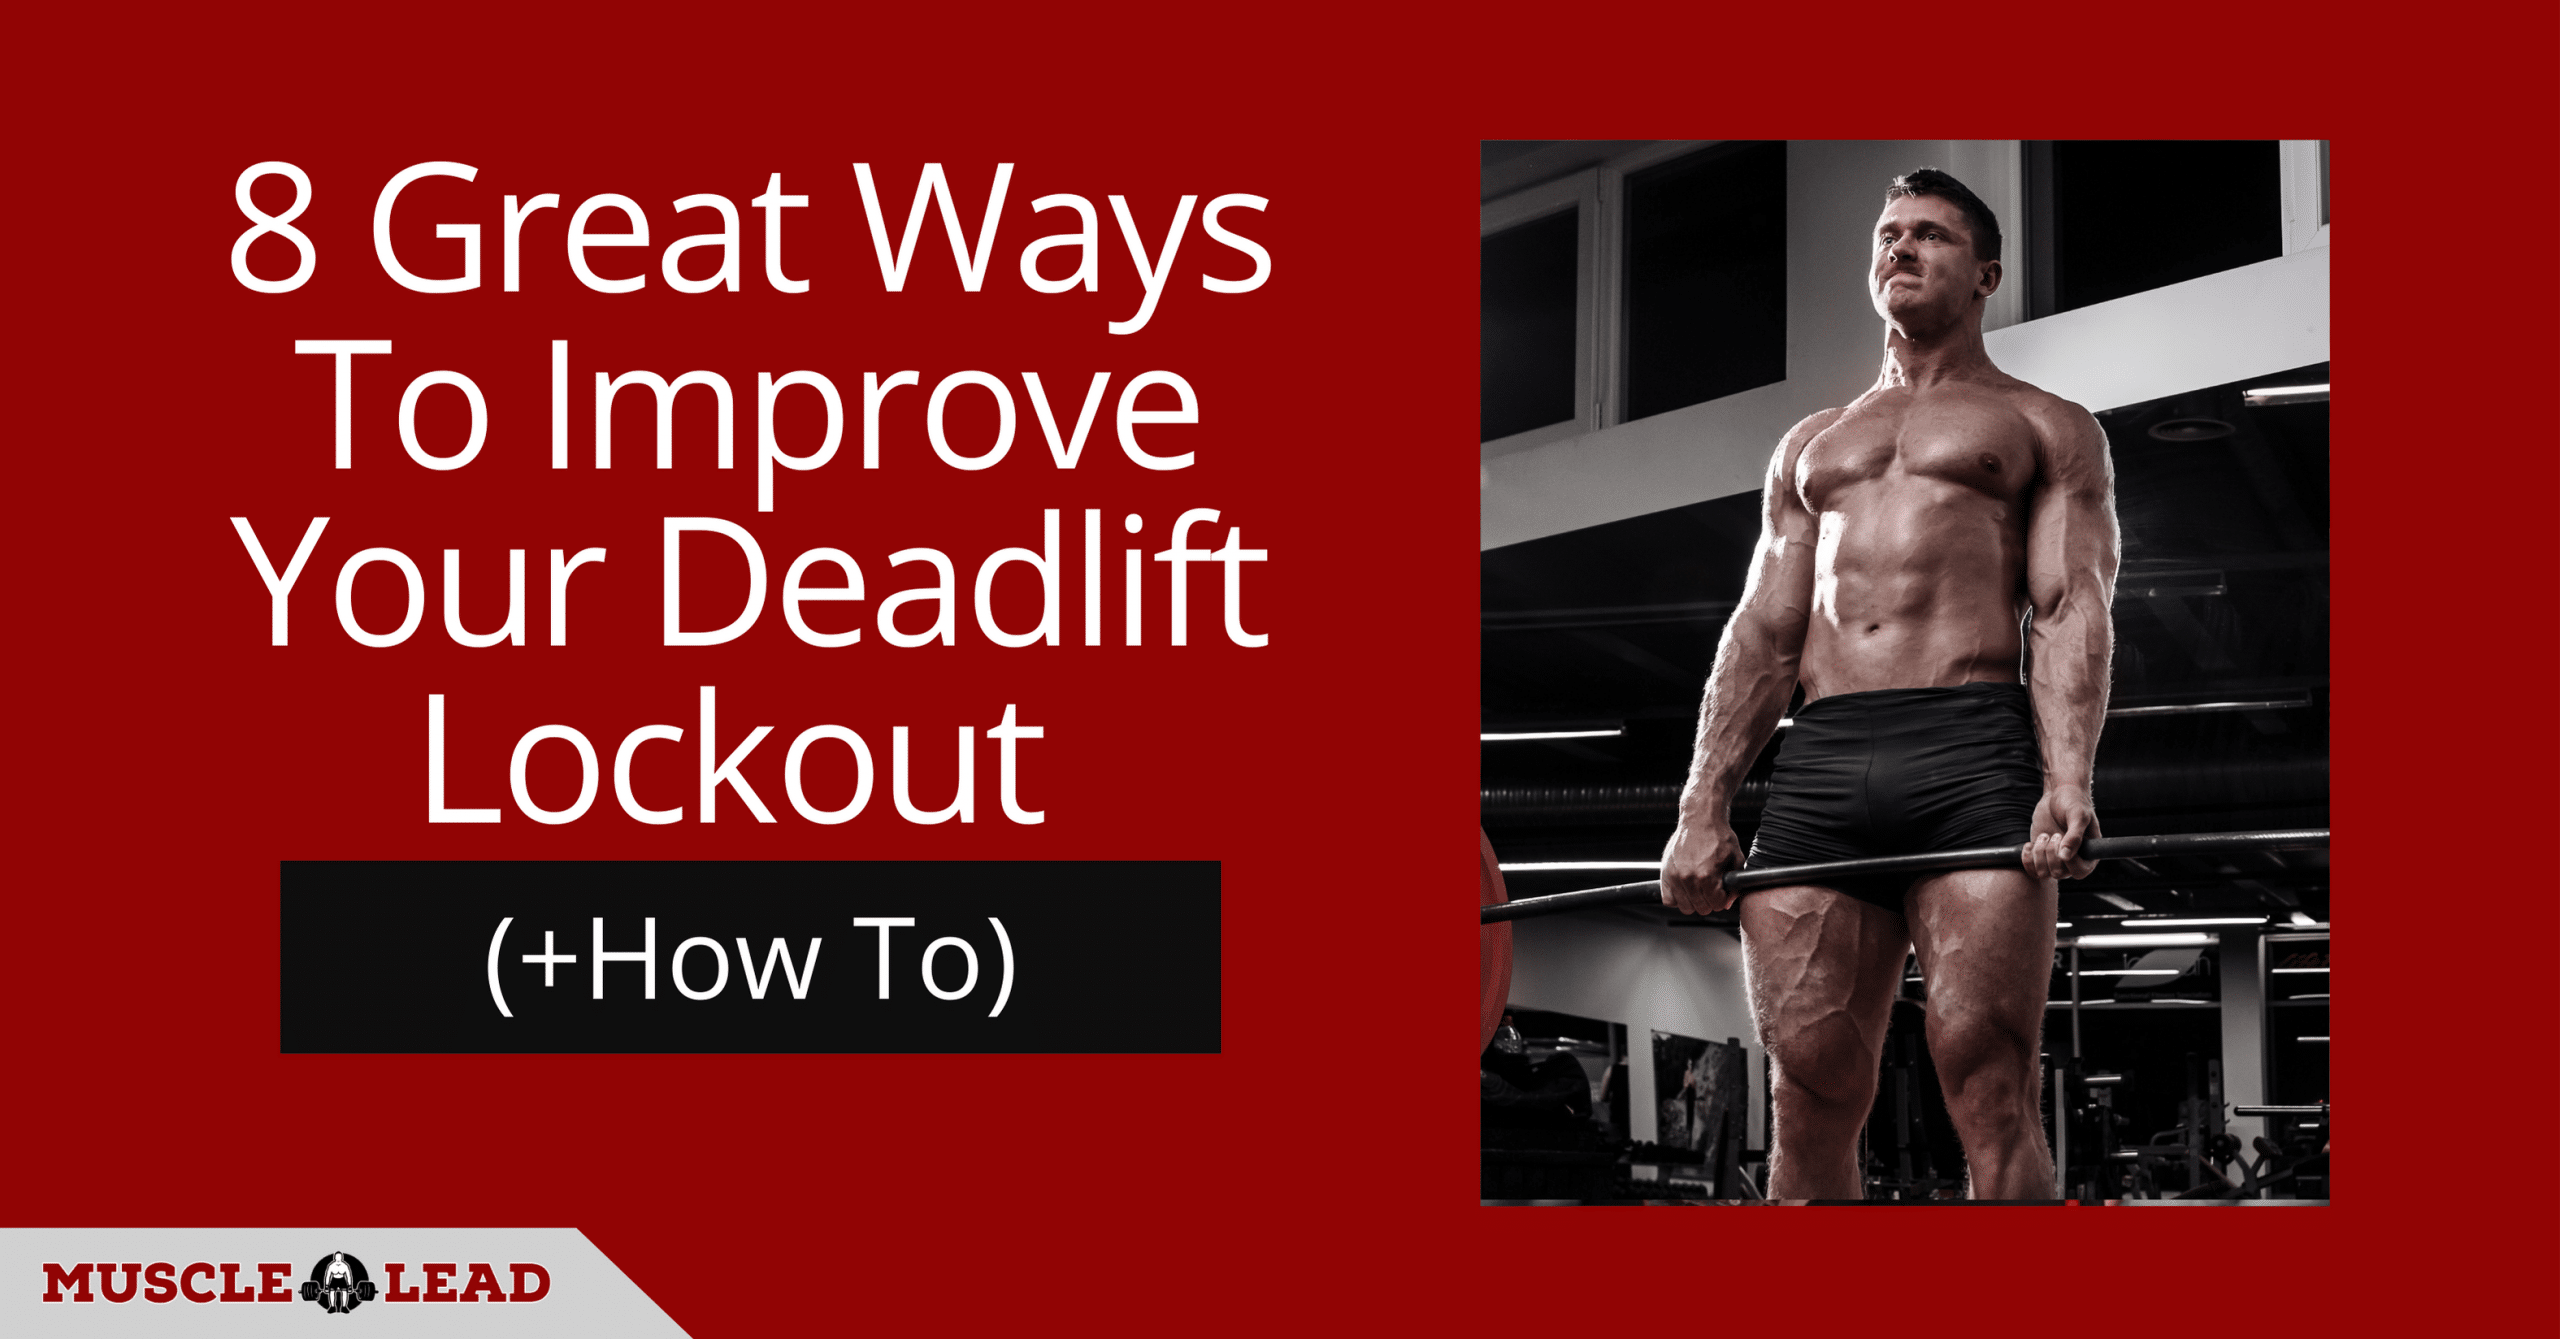 8 Great Ways To Improve Your Deadlift Lockout (+How To)